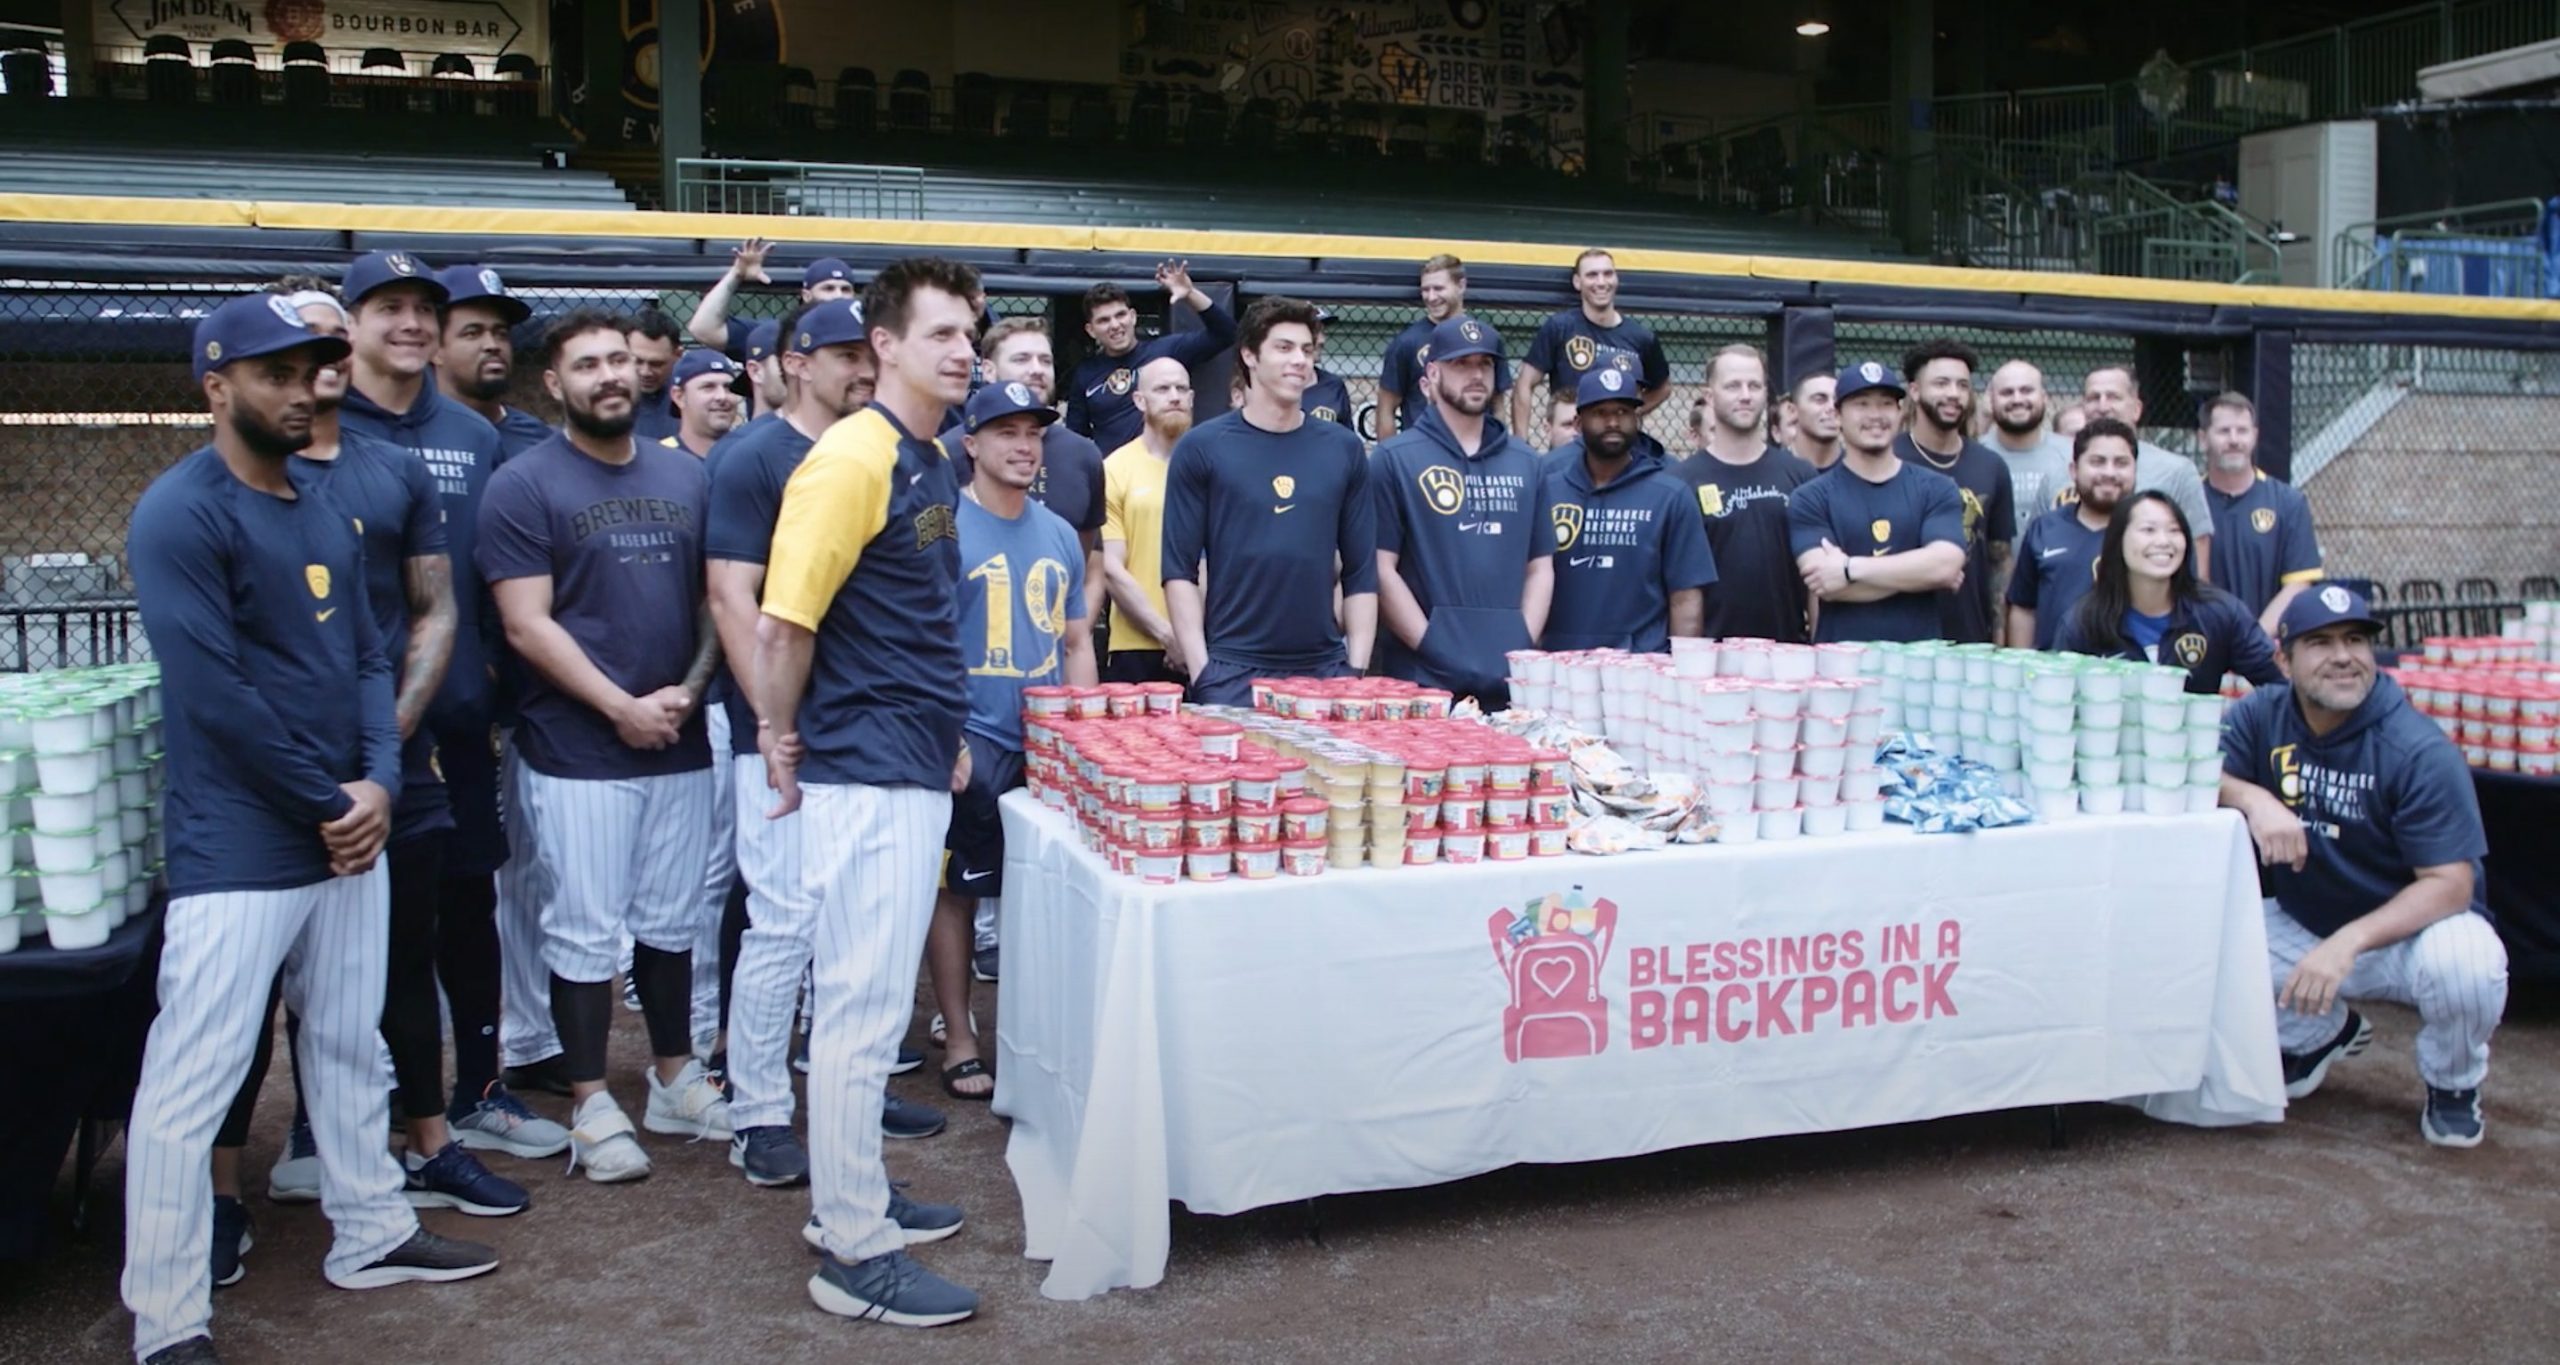 The Milwaukee Brewers and Blessings in a Backpack team up to fight childhood hunger!